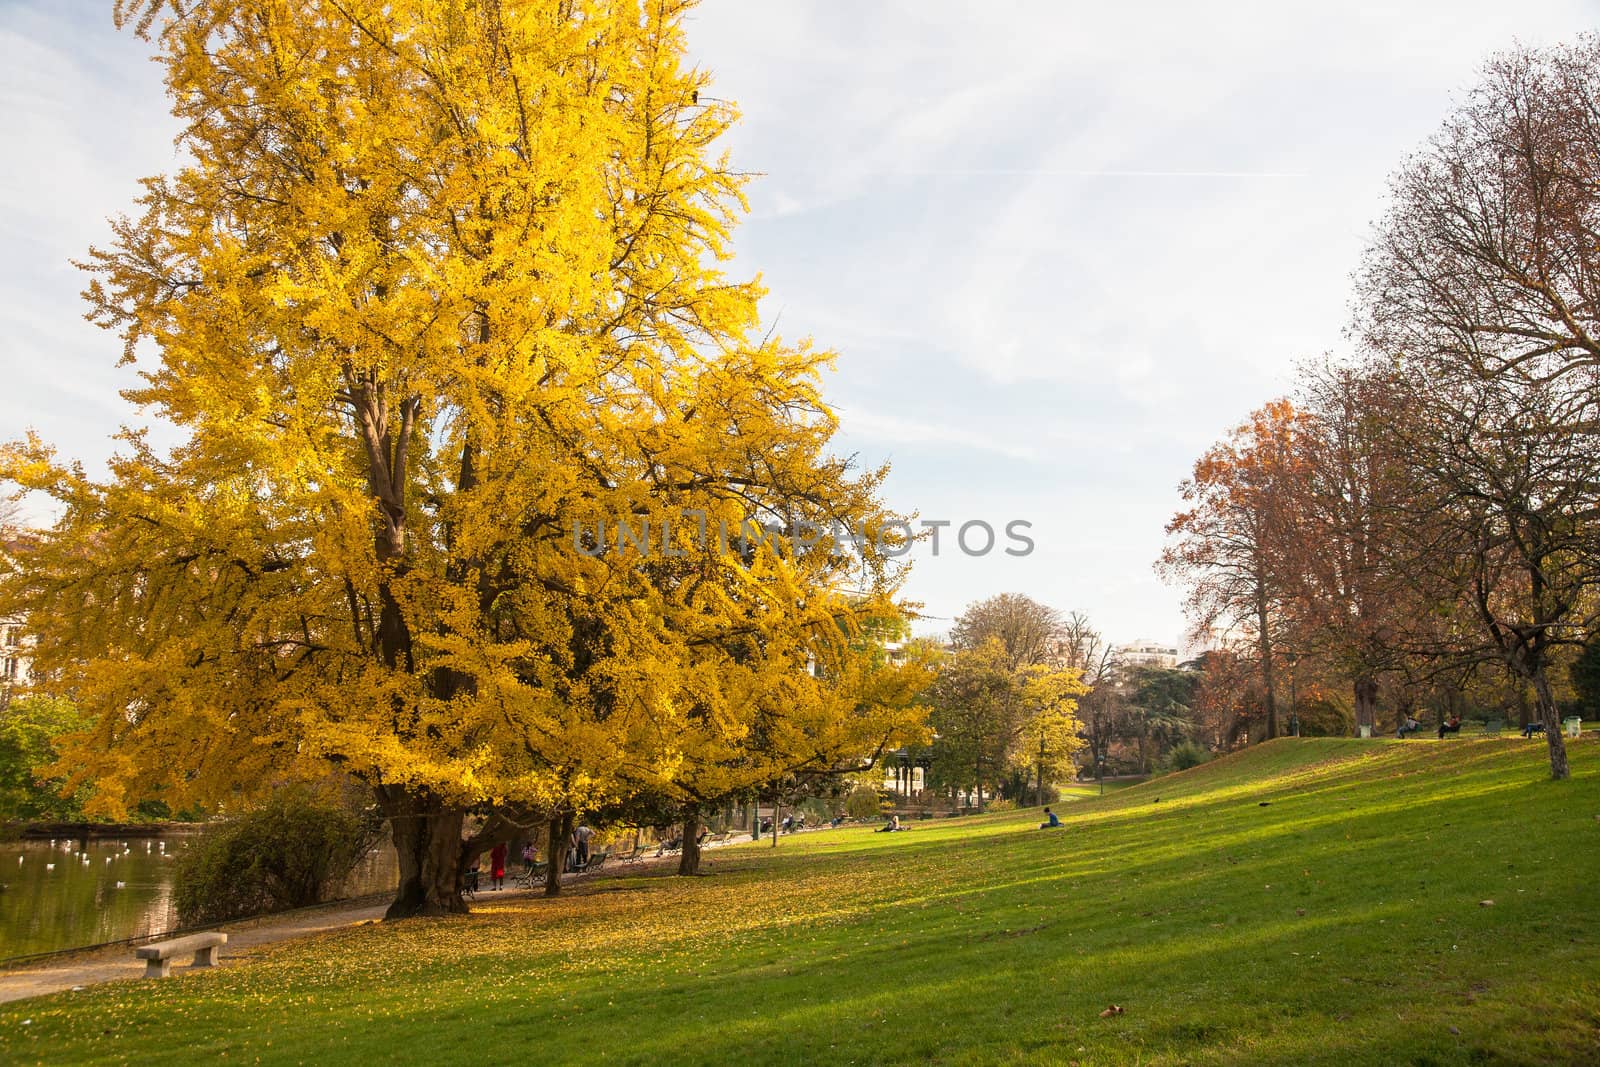 A huge tree with yellow leaves at the foot of a green slope by the lake in Montsouris Park, in Paris on a sunny, clear autumn day